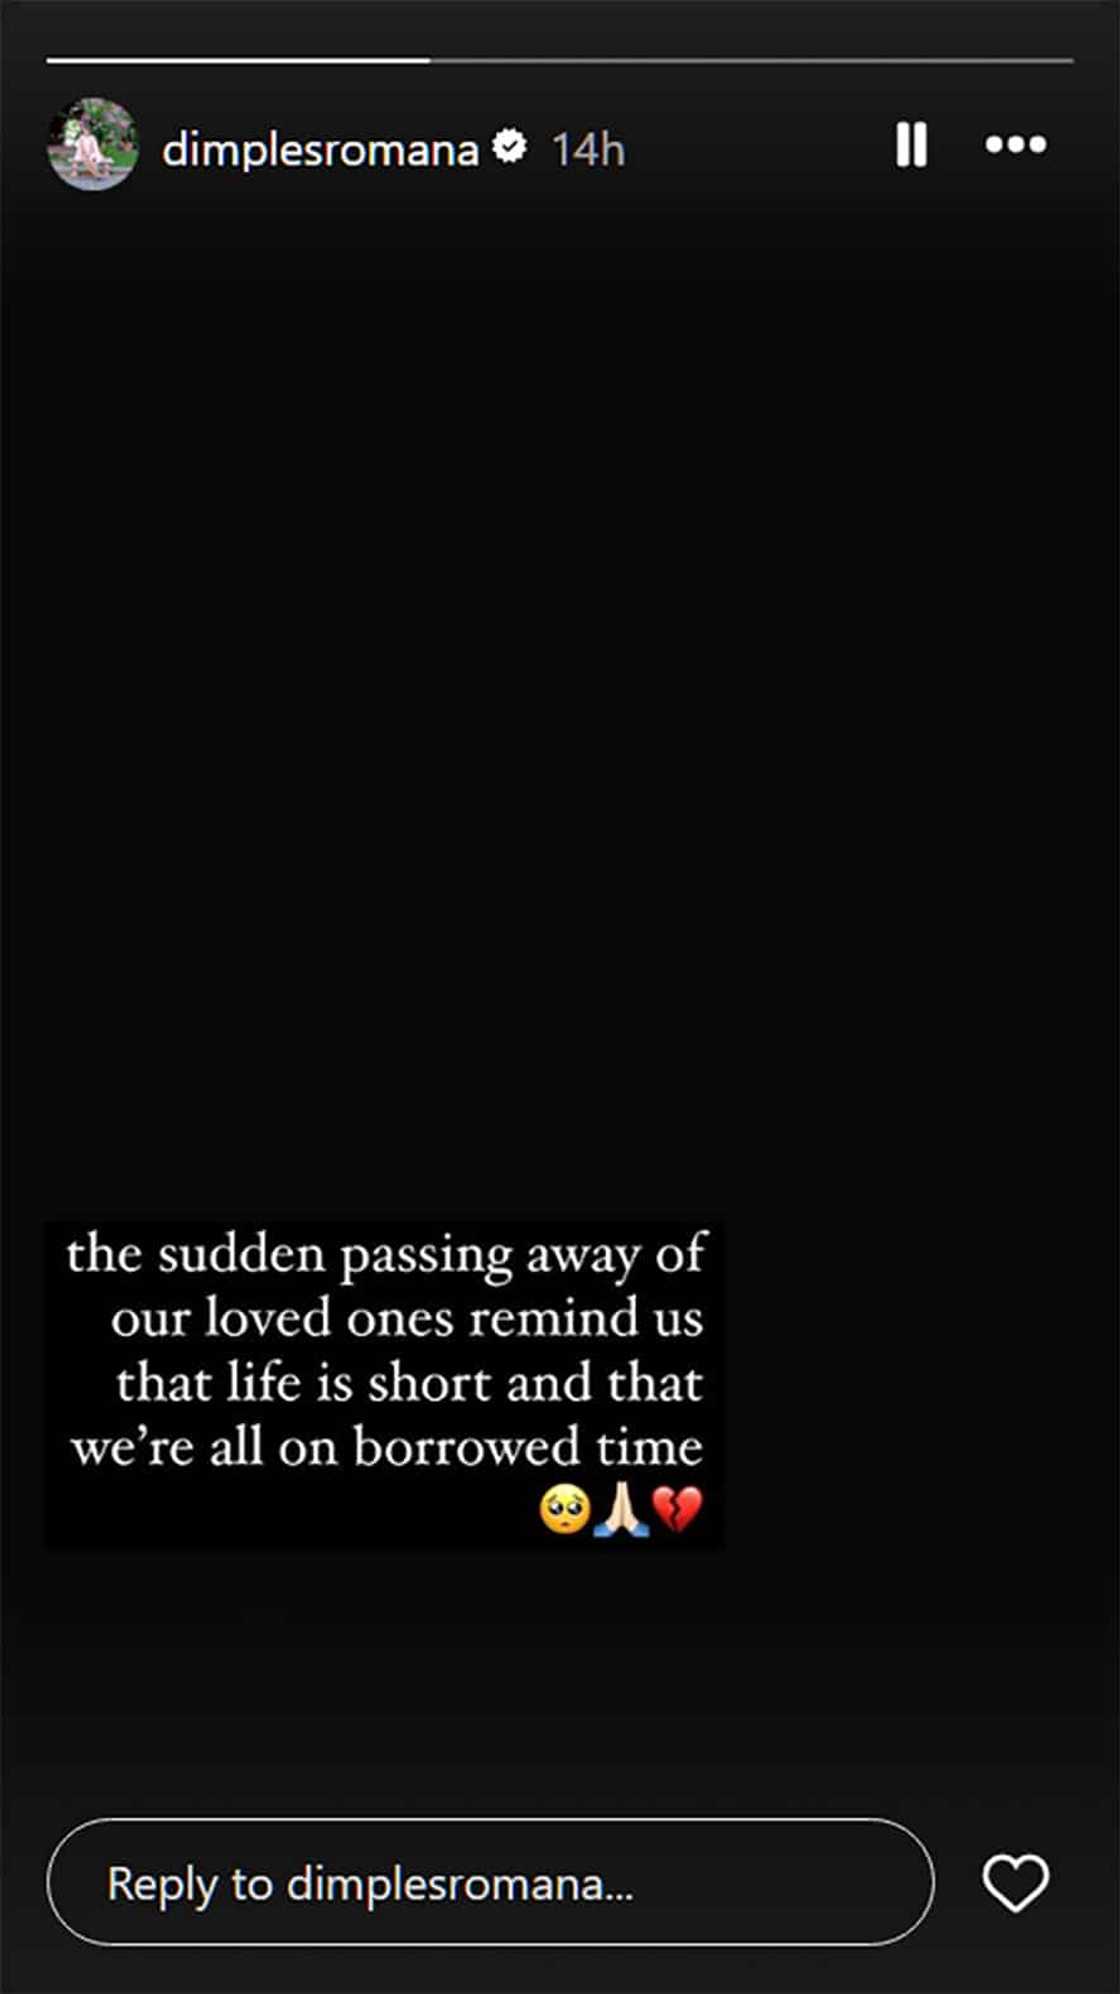 Dimples Romana, may reminder para sa lahat: “We’re all on borrowed time and life is short”